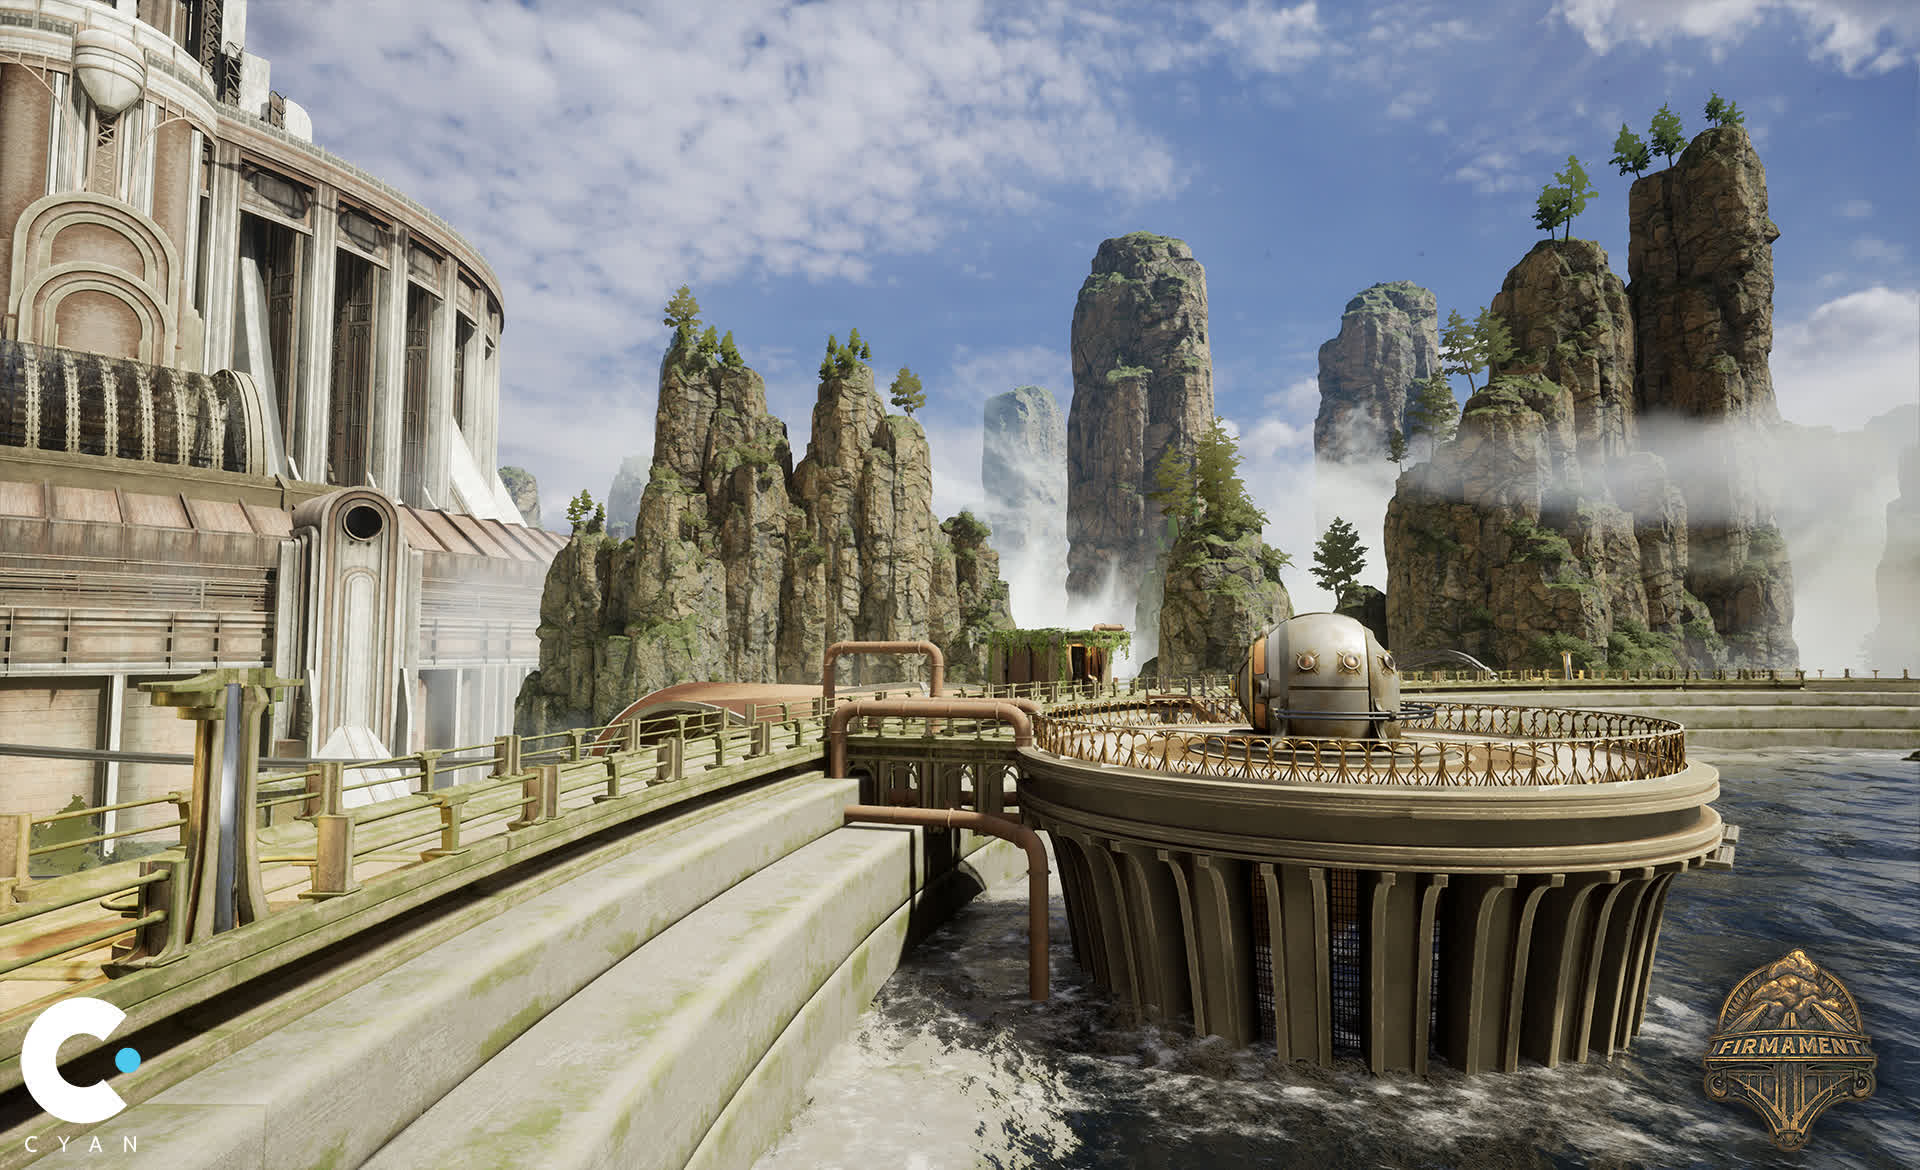 Myst developer slammed for using AI-generated content in latest game